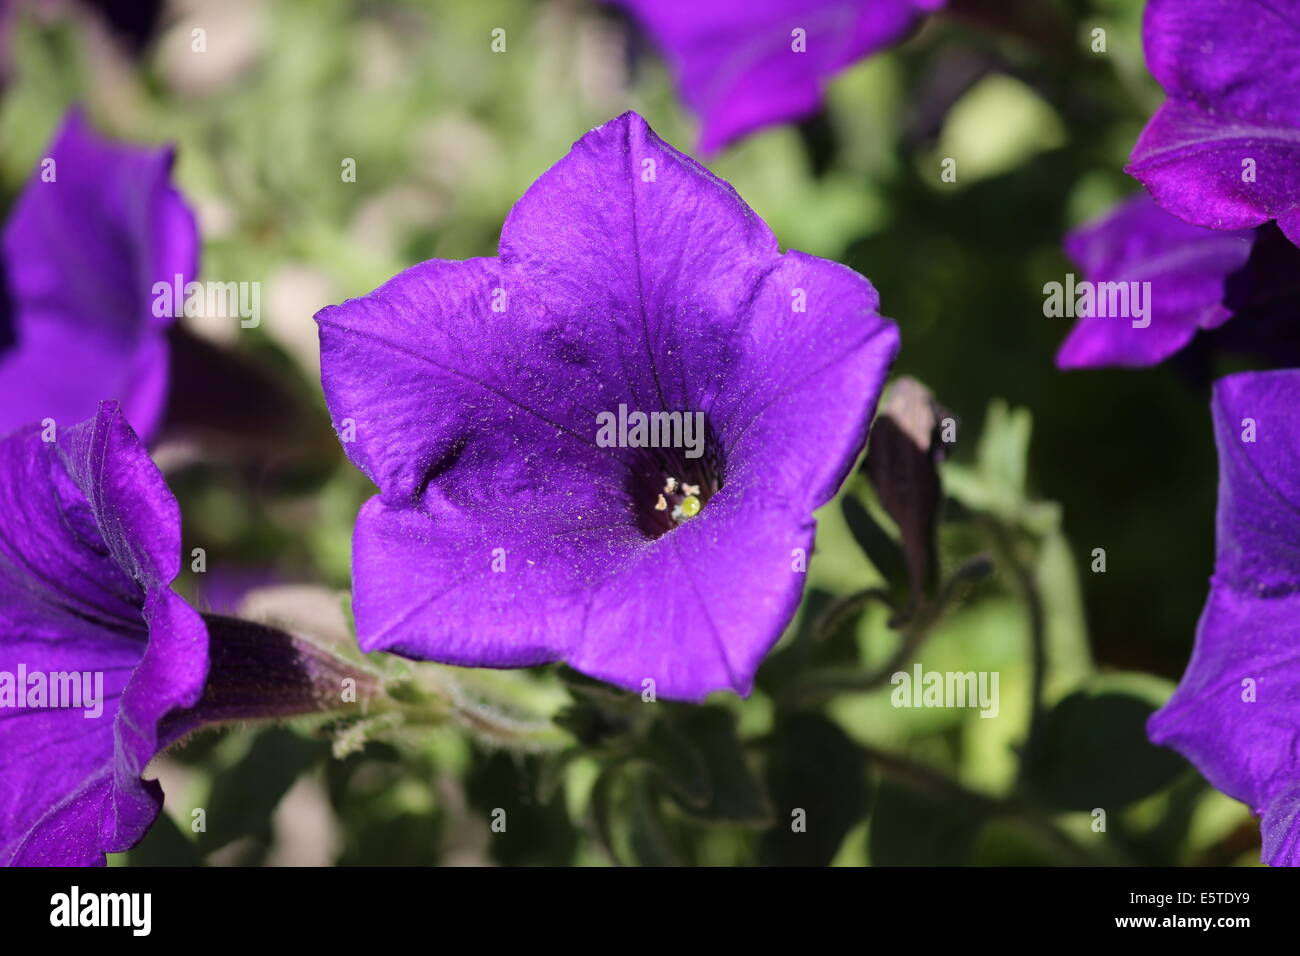 An open flower on a sunny day. Stock Photo